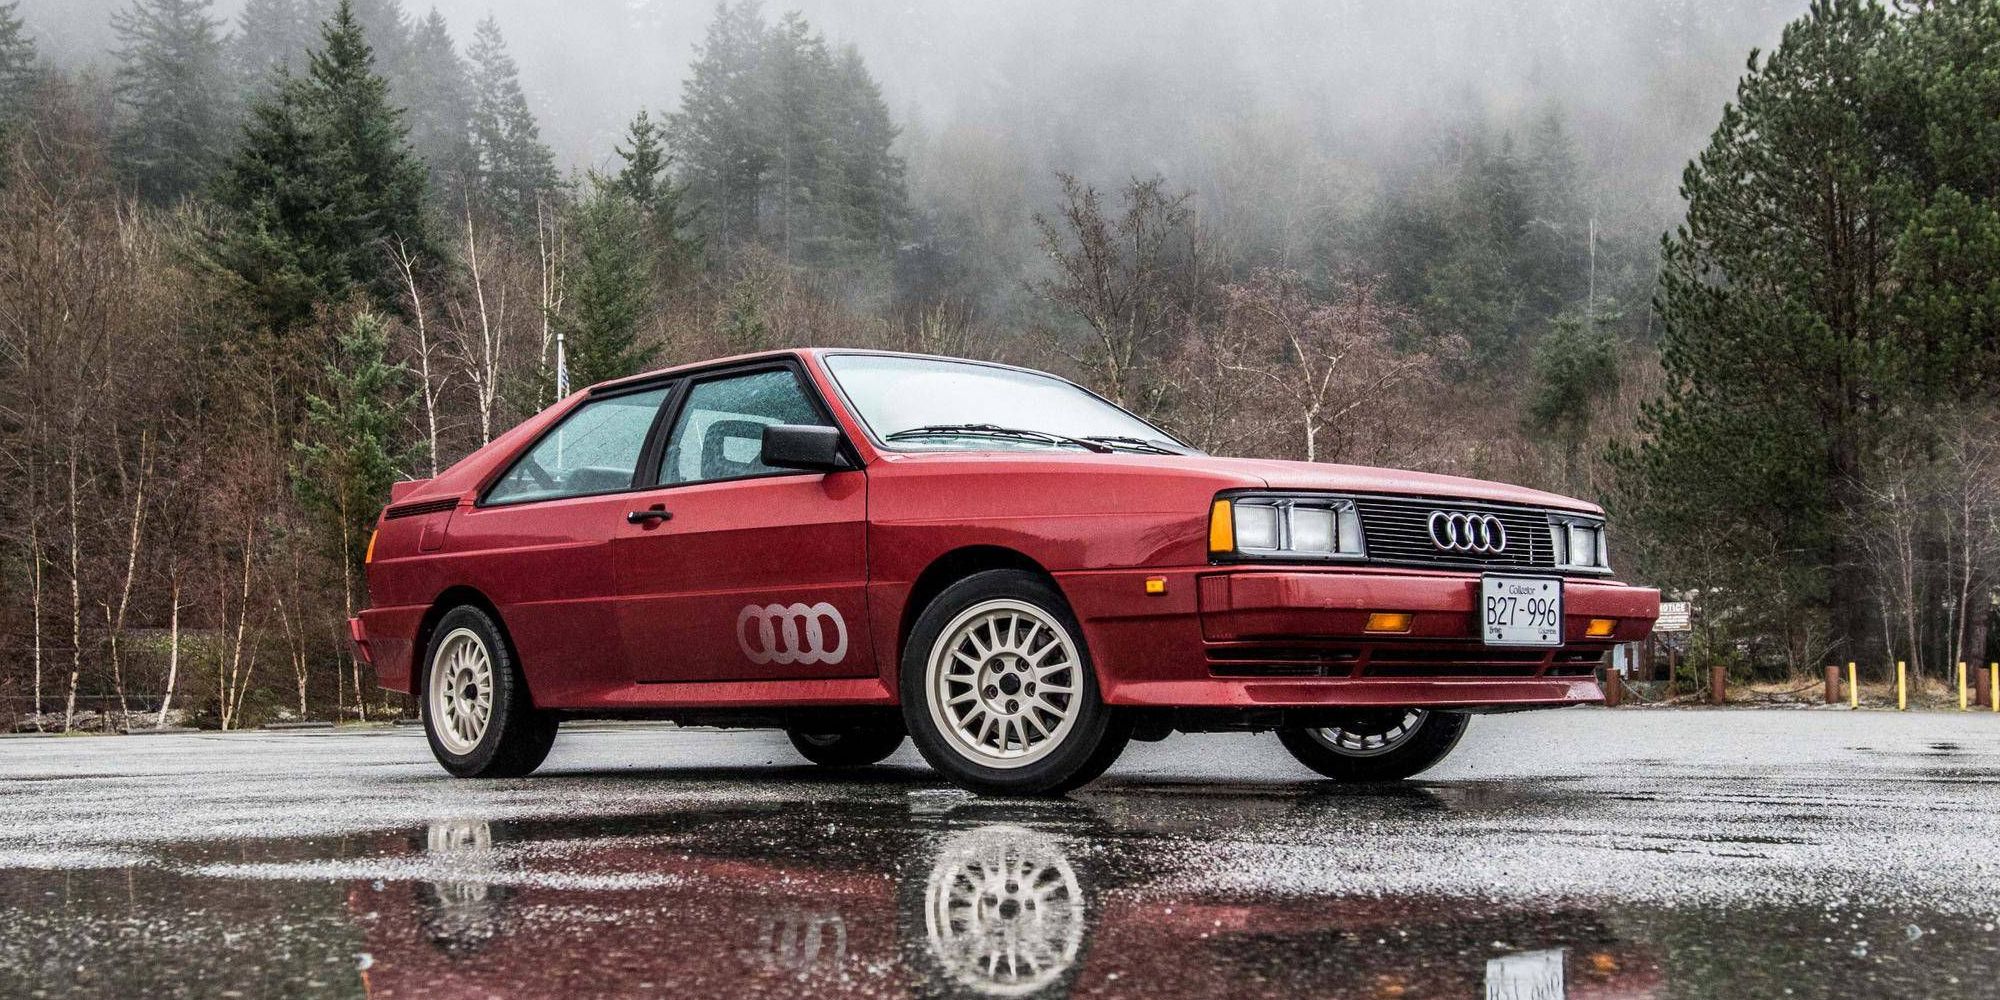 The Audi Quattro Coupe in red